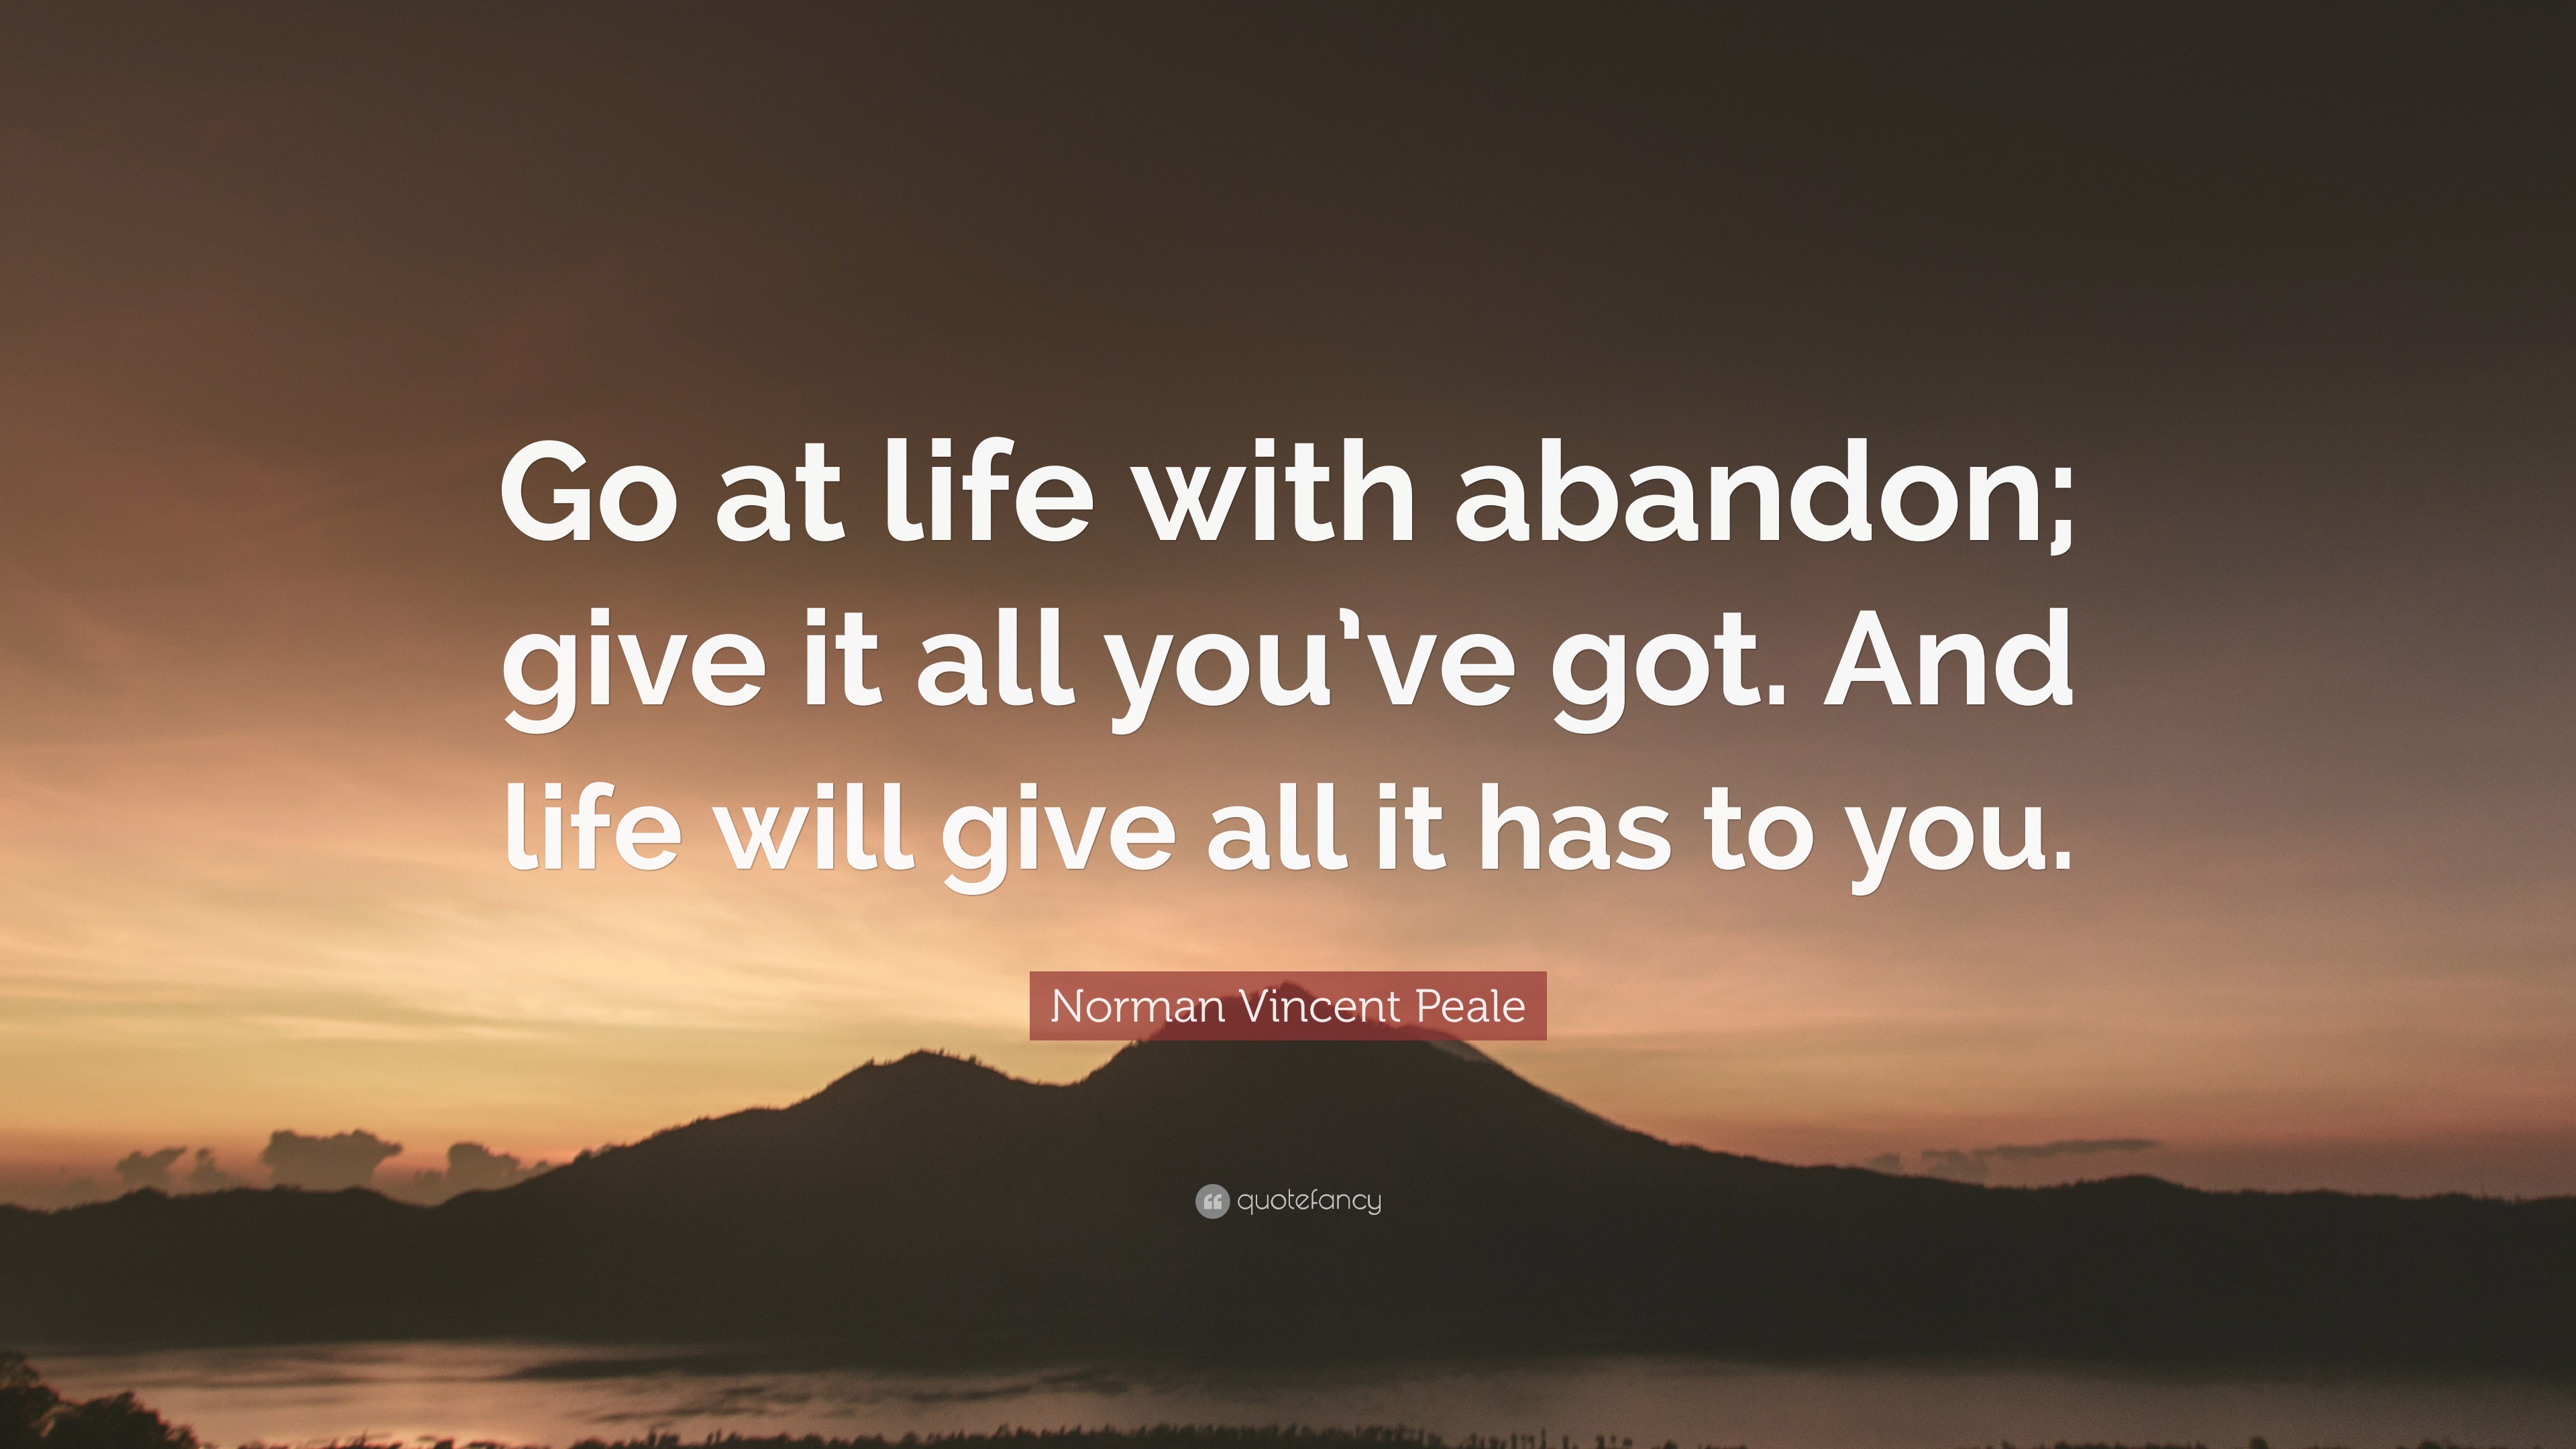 Norman Vincent Peale Quote: “Go at life with abandon; give it all you ...